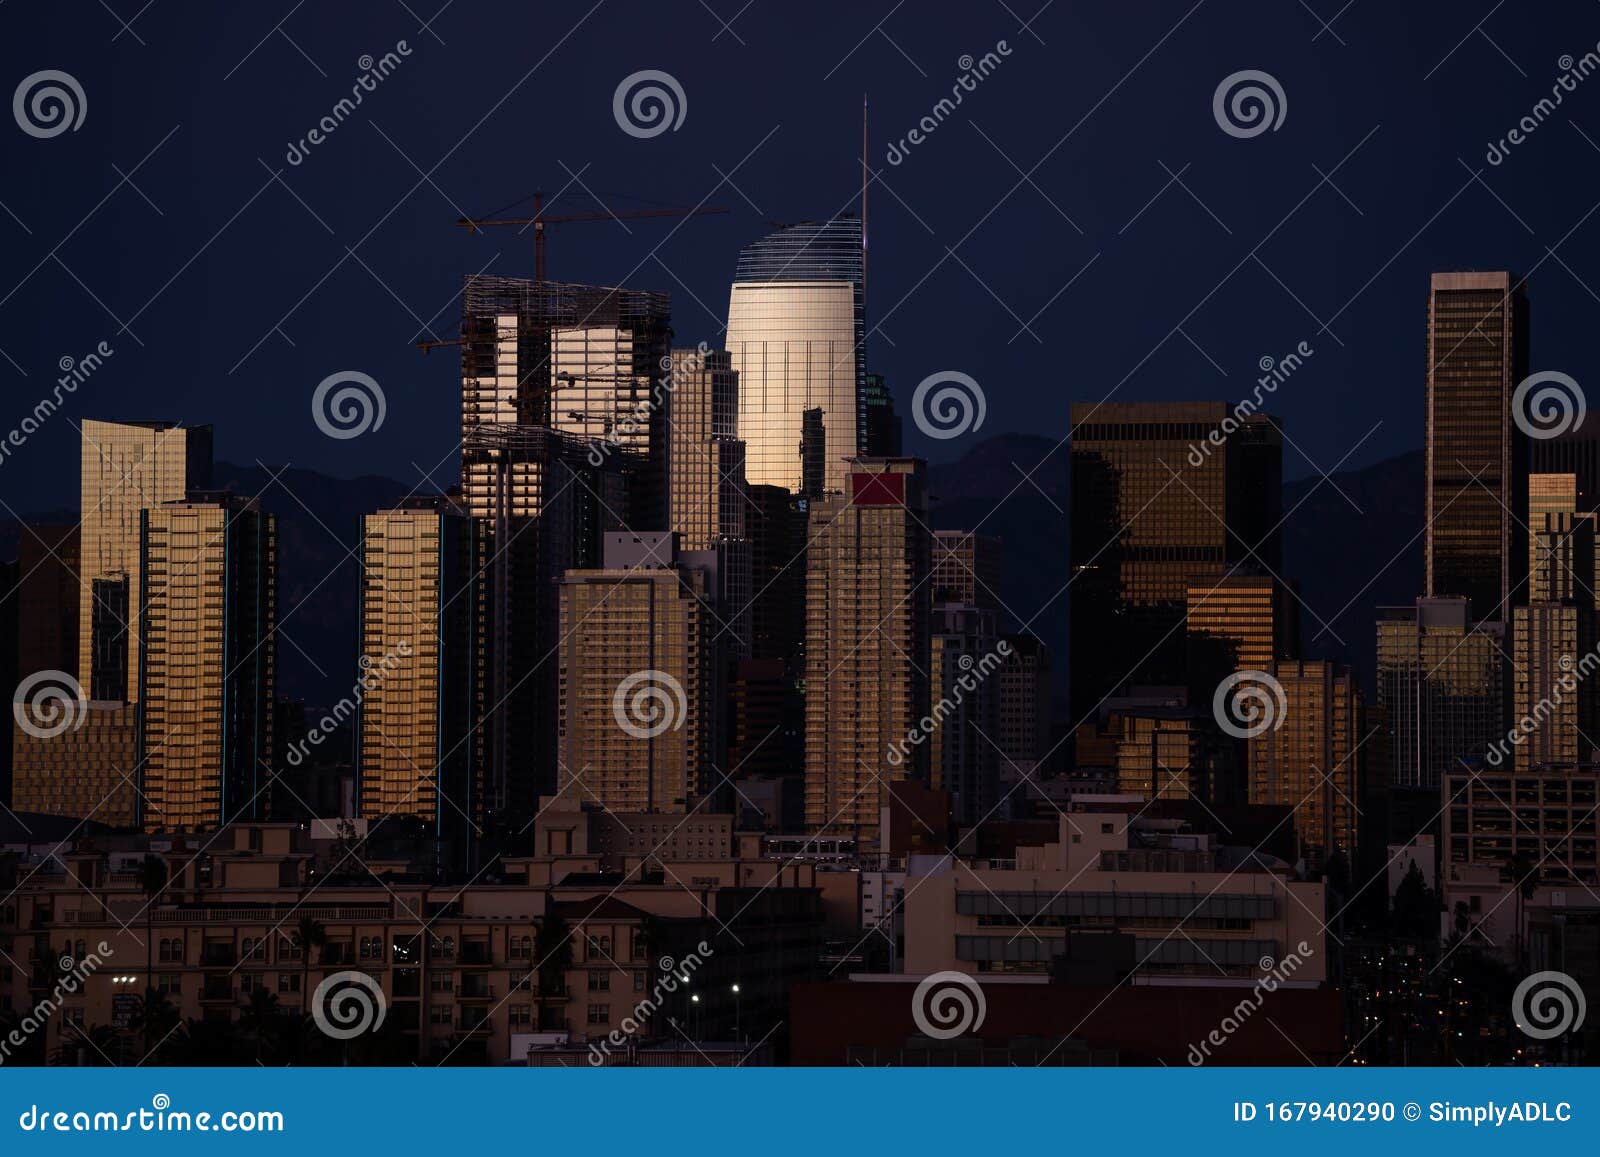 close up view of los angeles highrises in an evening light